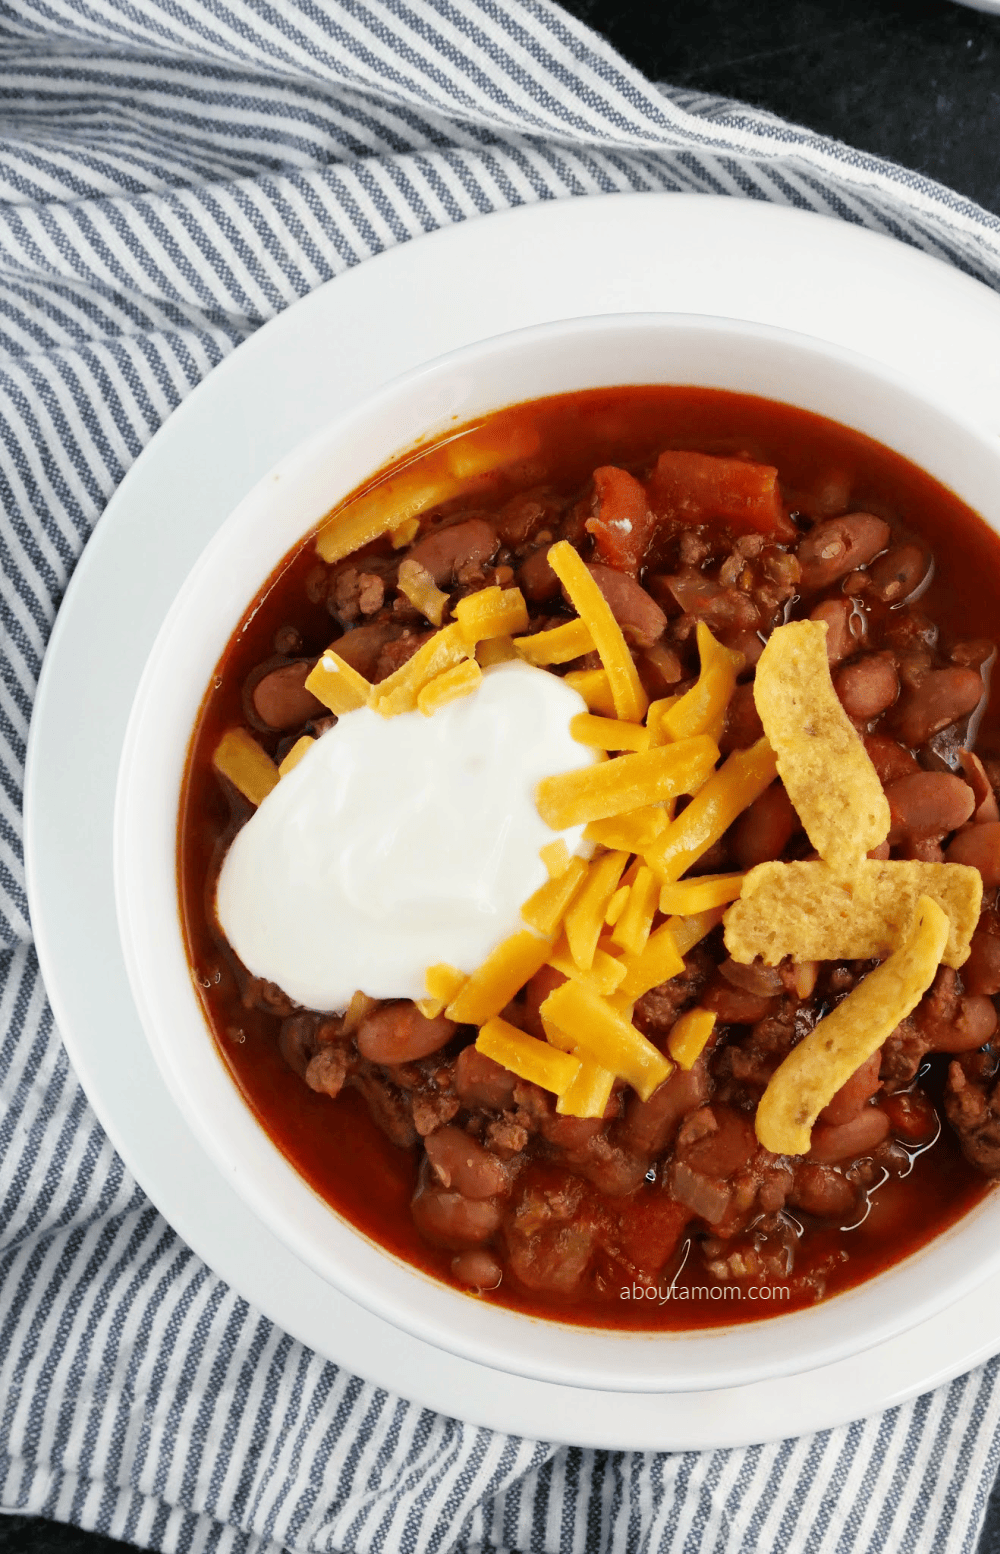 Cowboys love their chili, but you don't have to be a cowboy to appreciate this hearty slow cooker cowboy chili recipe. Made using Hurst BBQ Style Cowboy Beans with seasoning packet, ground beef, diced green chiles and a few other ingredients, this slow cooker chili recipe couldn't be any simpler. 